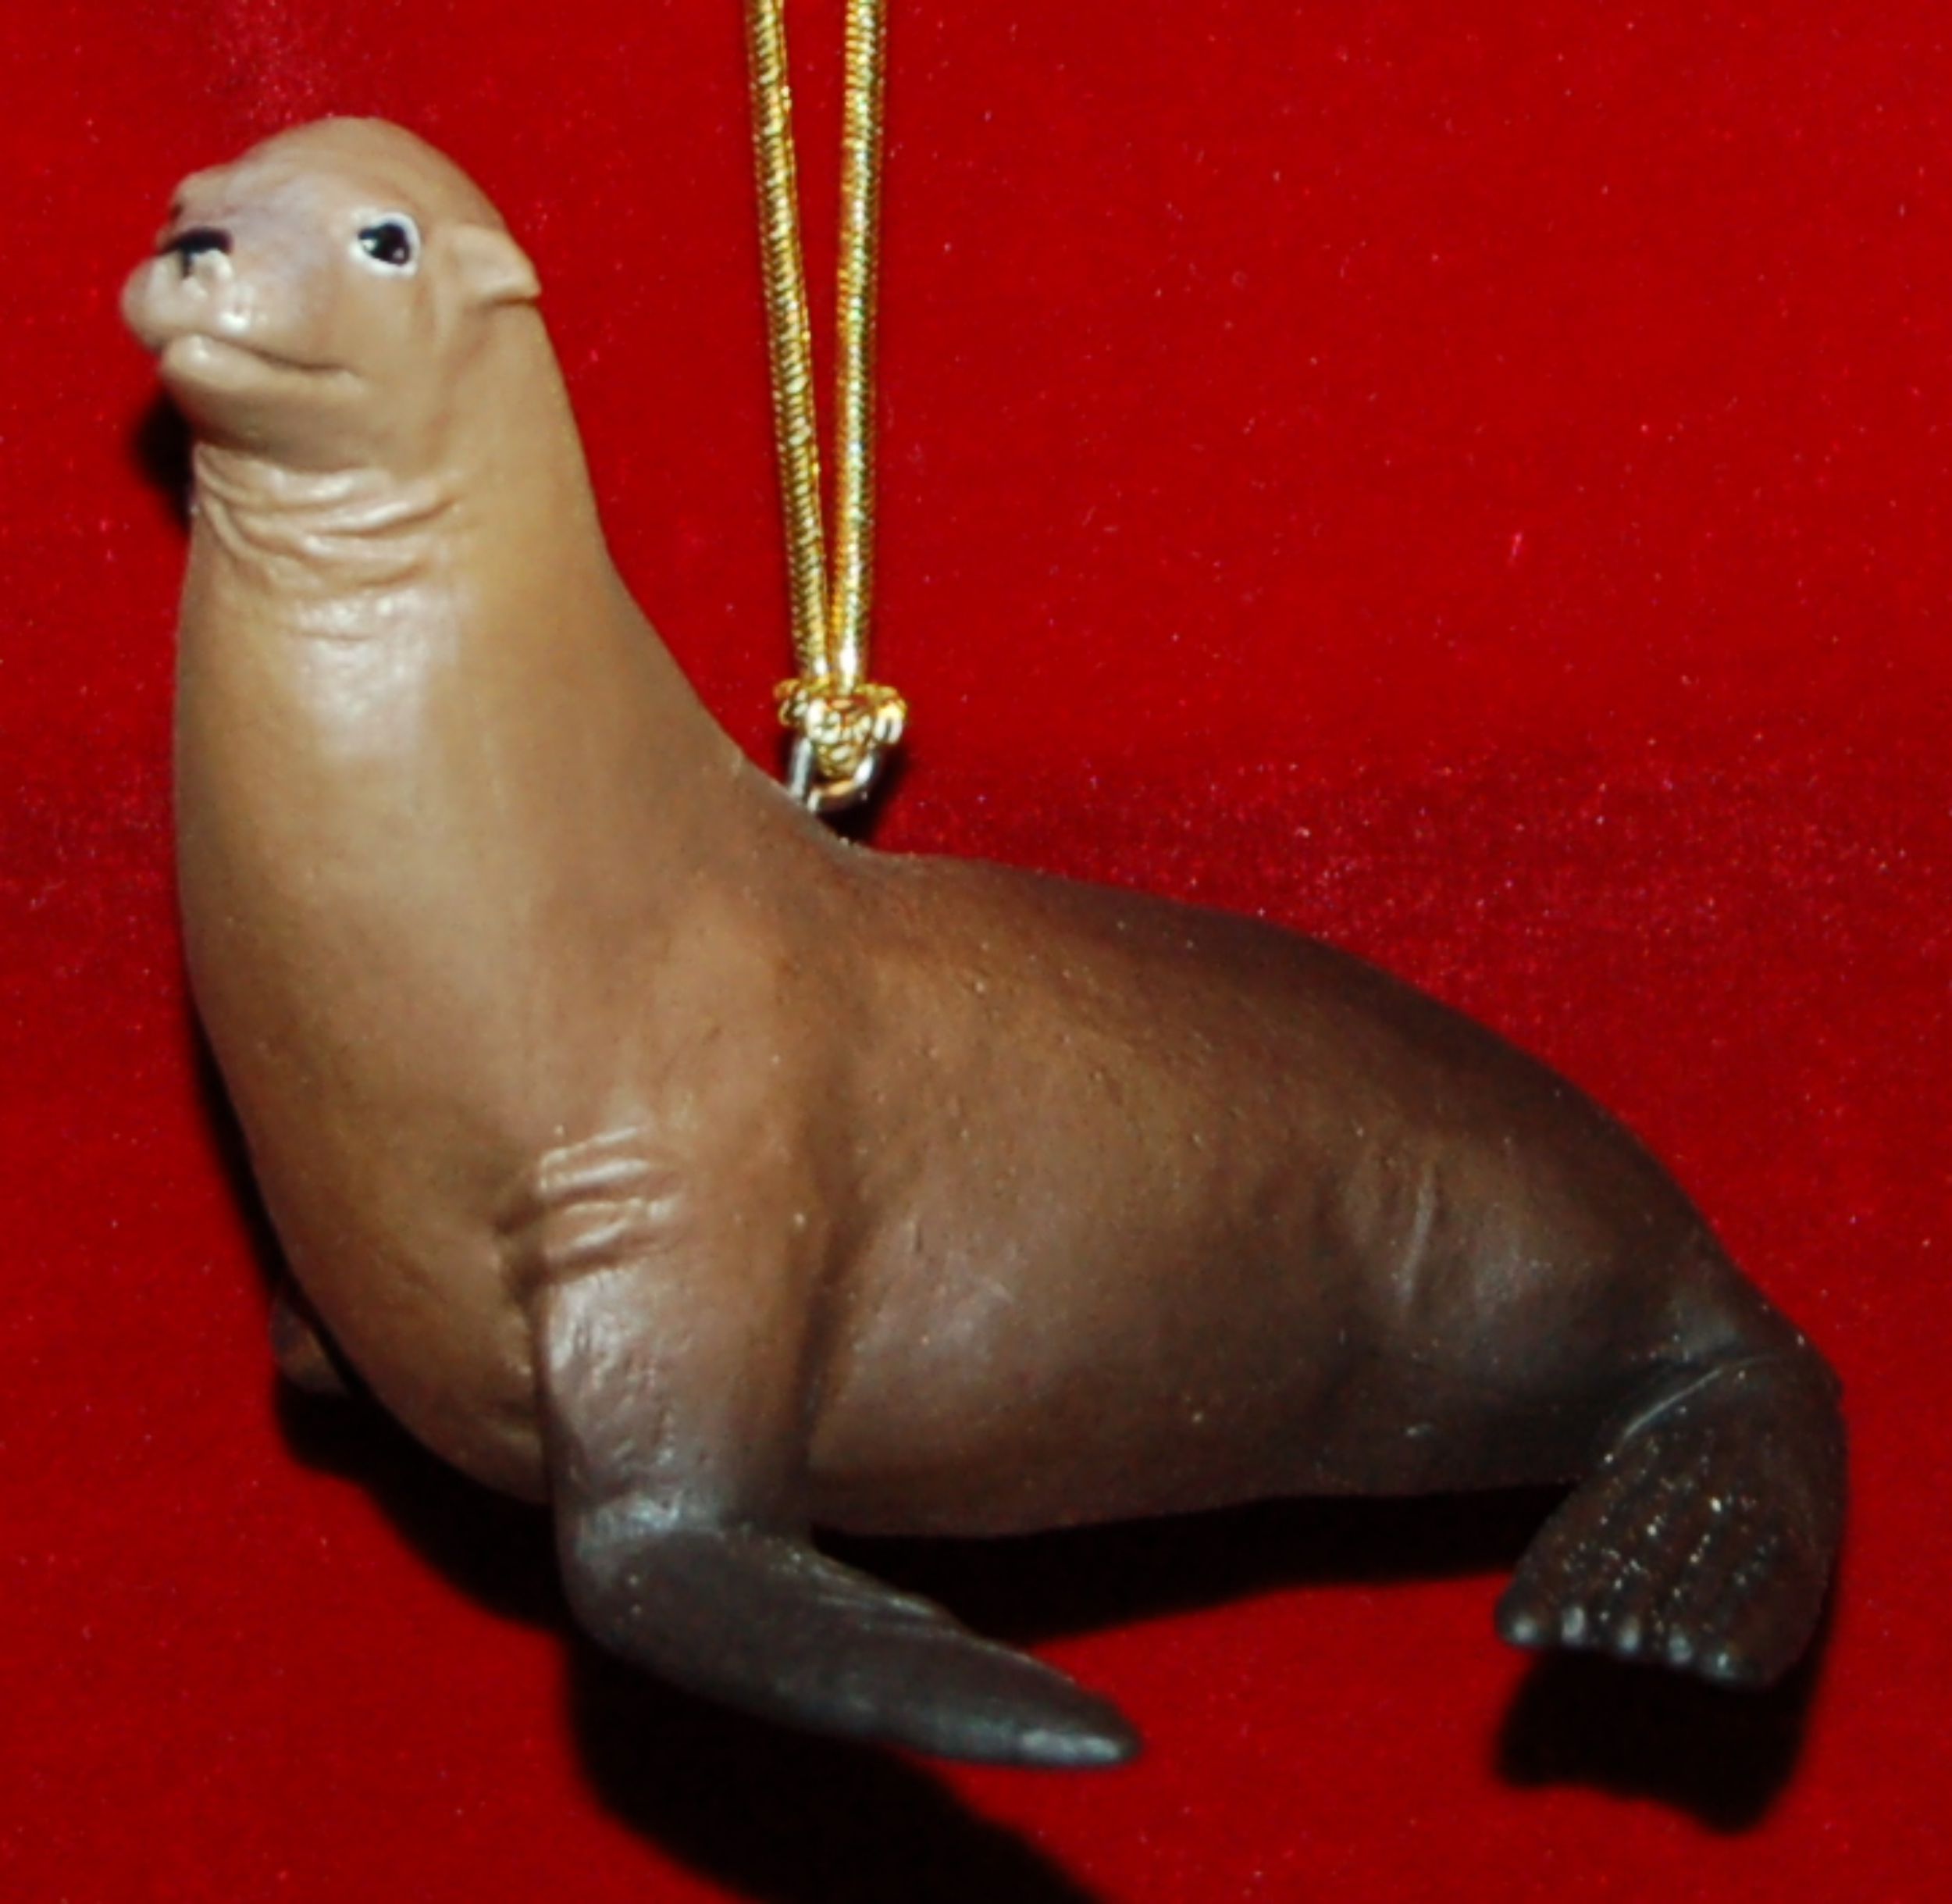 Sea Lion Christmas Ornament Personalized by RussellRhodes.com